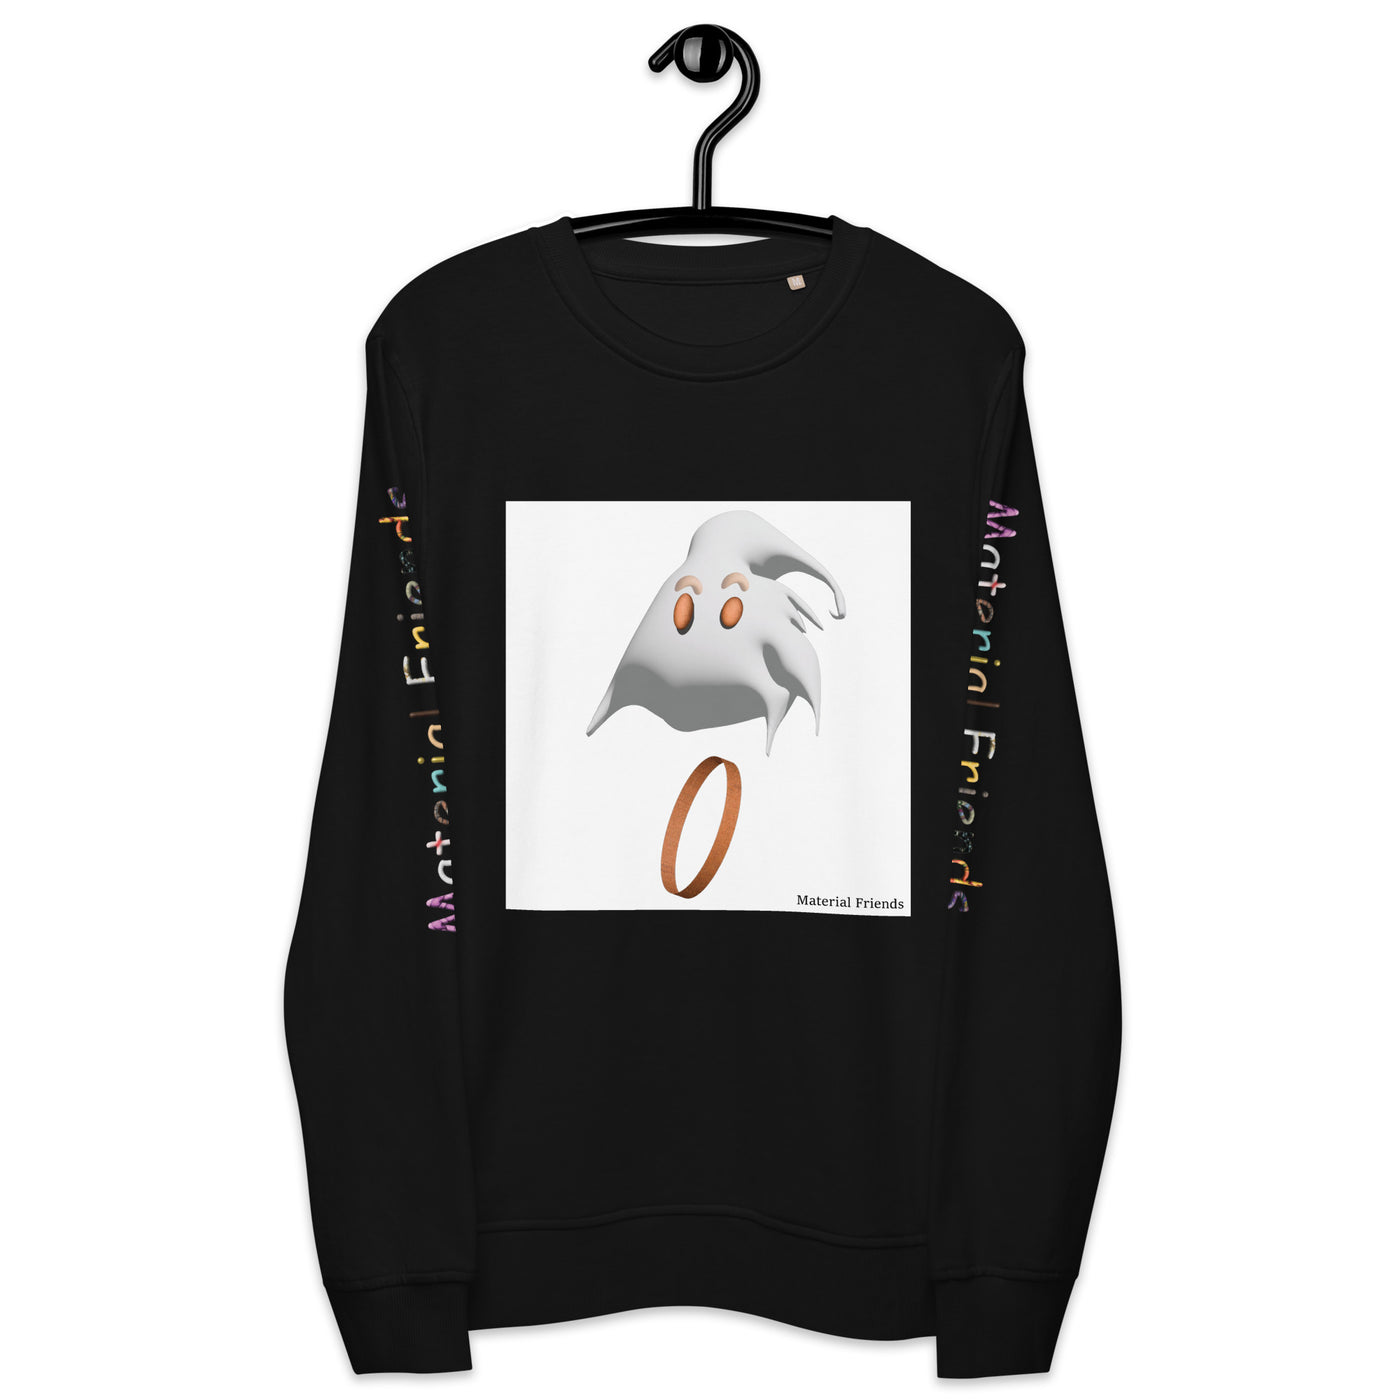 Material Ghost Sweater #1